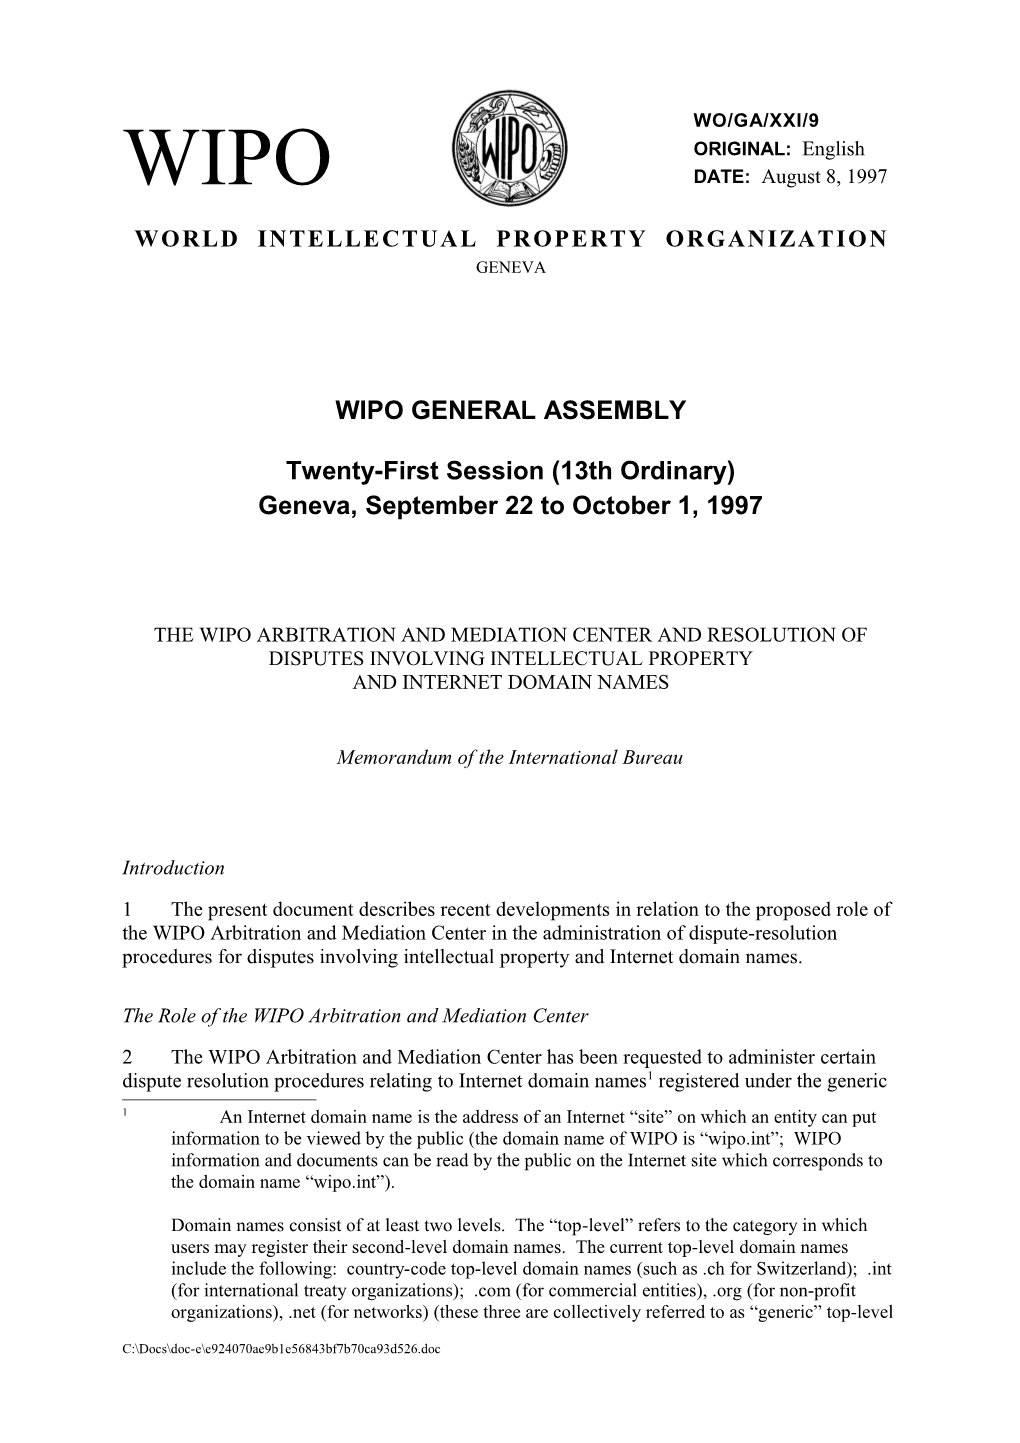 WO/GA/XXI/9: the WIPO Arbitration and Mediation Center and Resolution of Disputes Involving